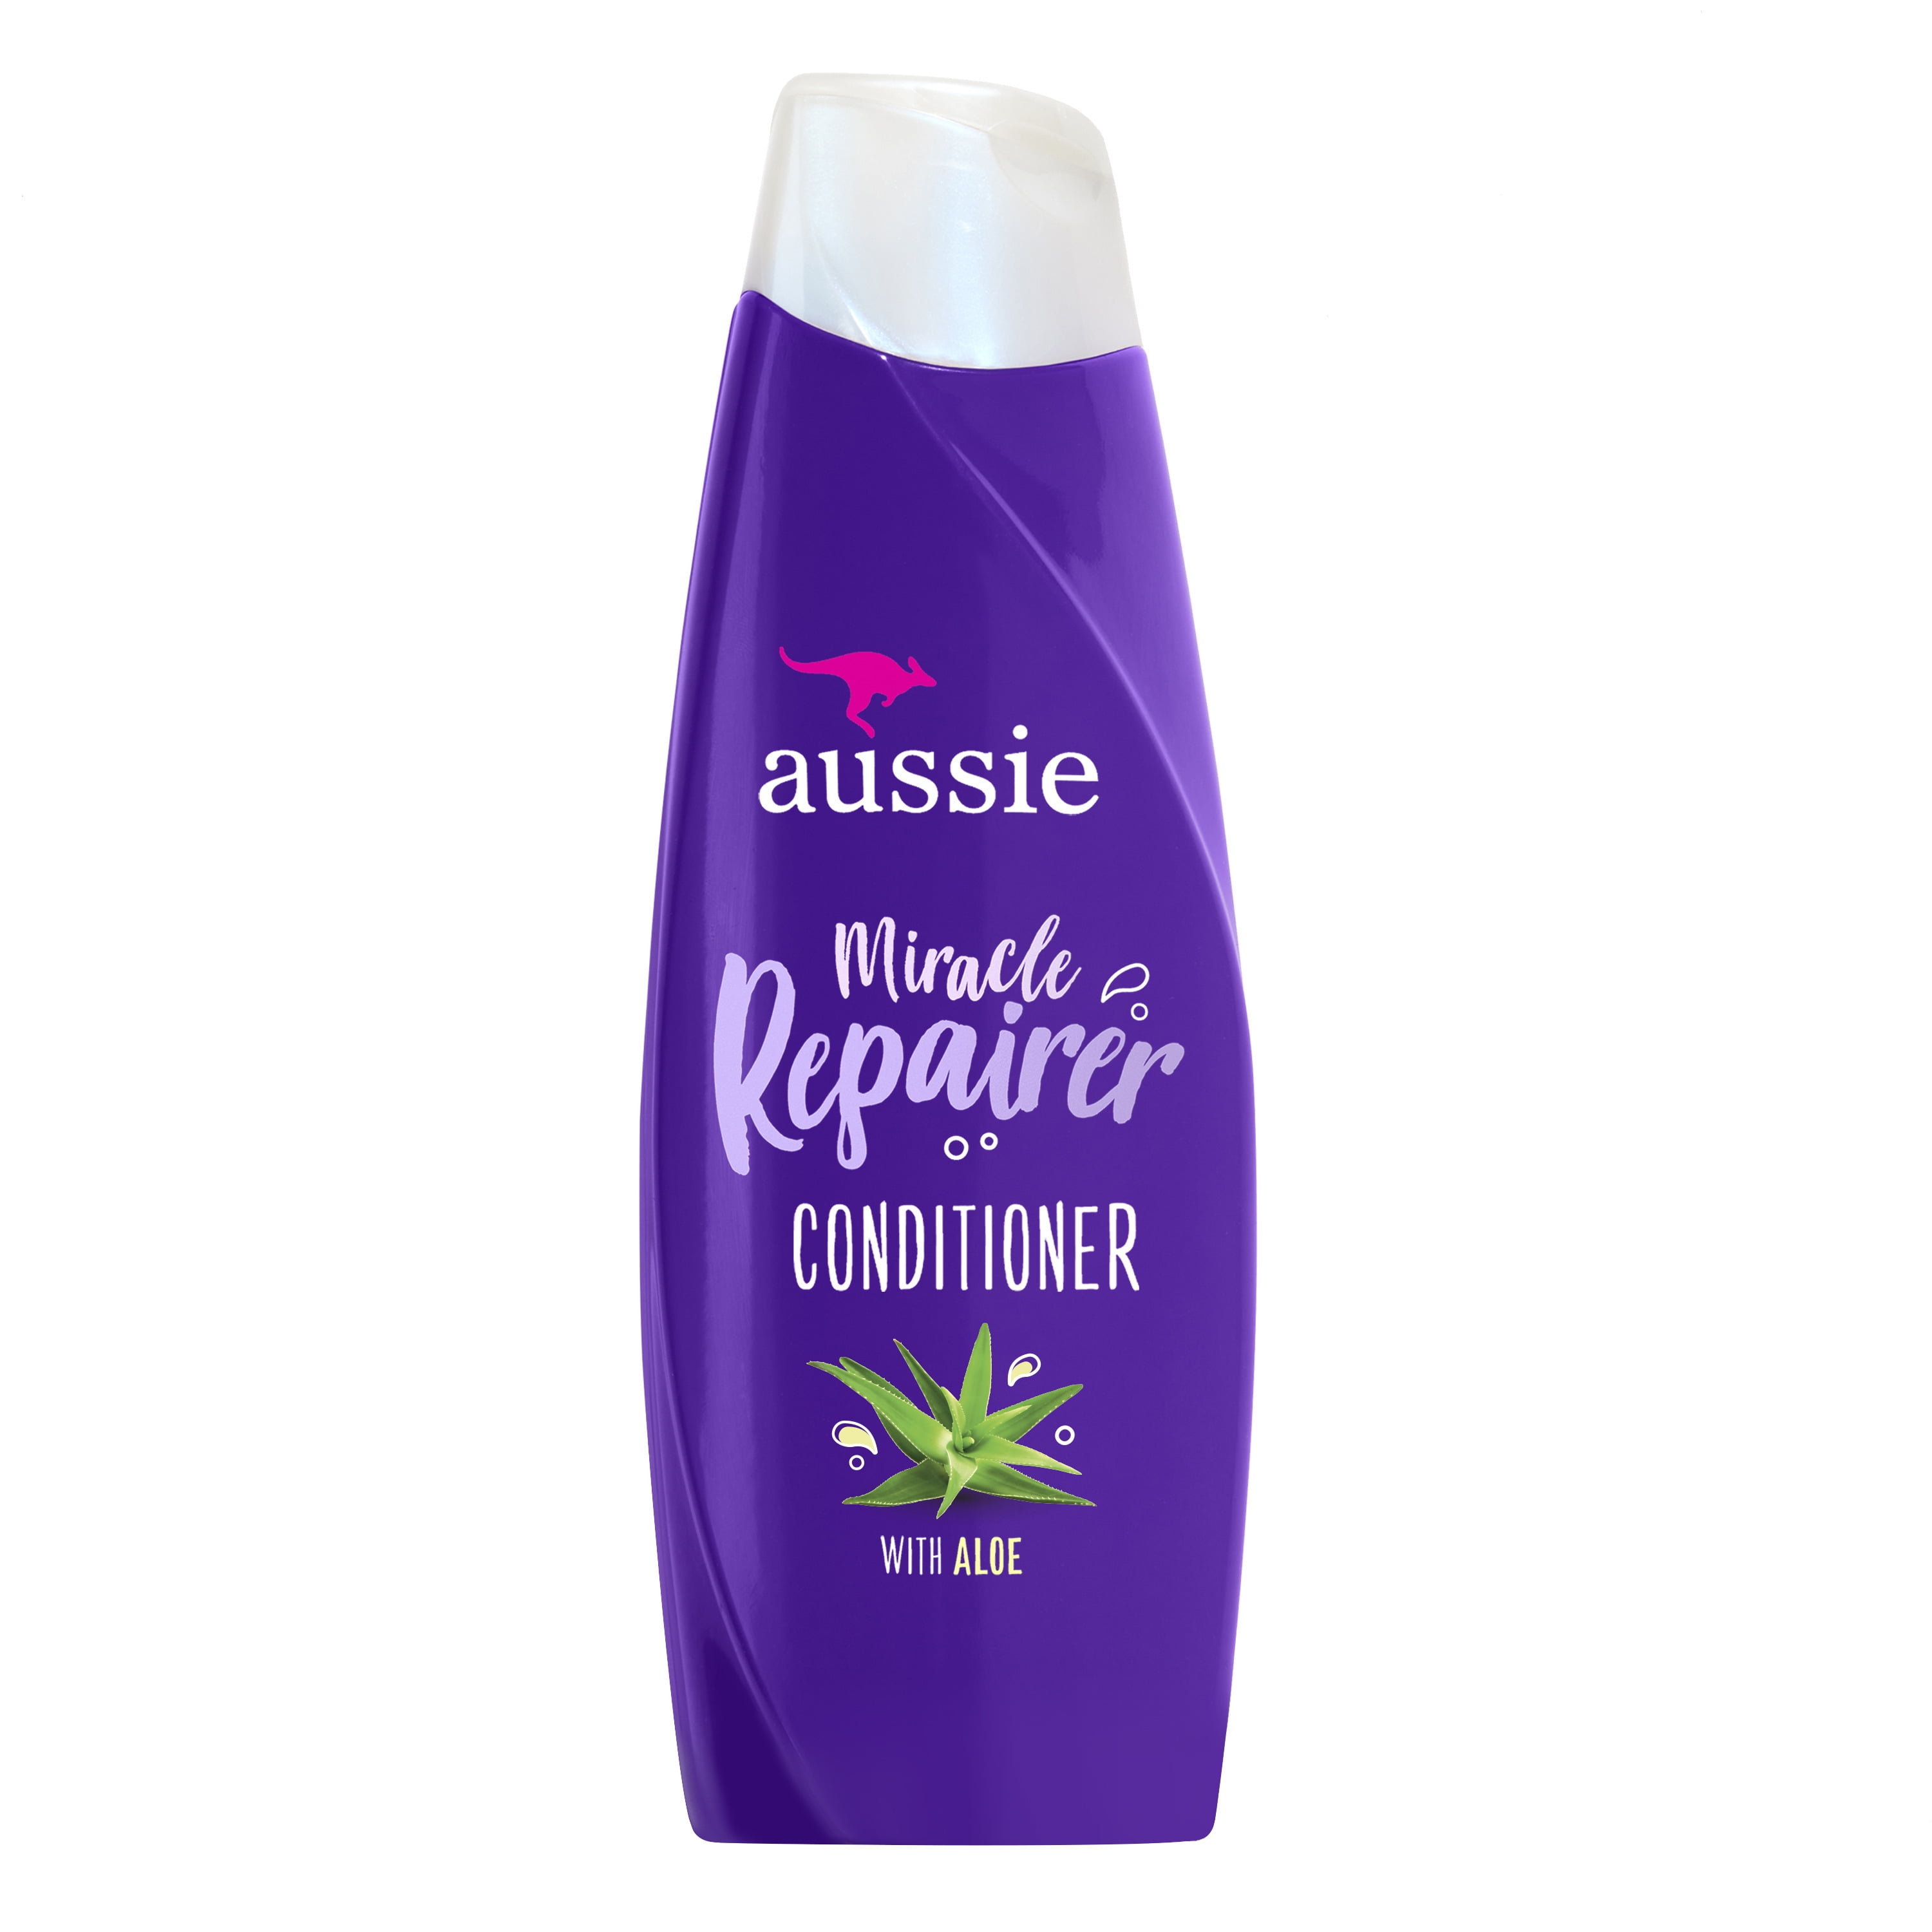 Aussie Miracle Repairer Conditioner with Aloe for All Hair Types, 12.1 fl oz